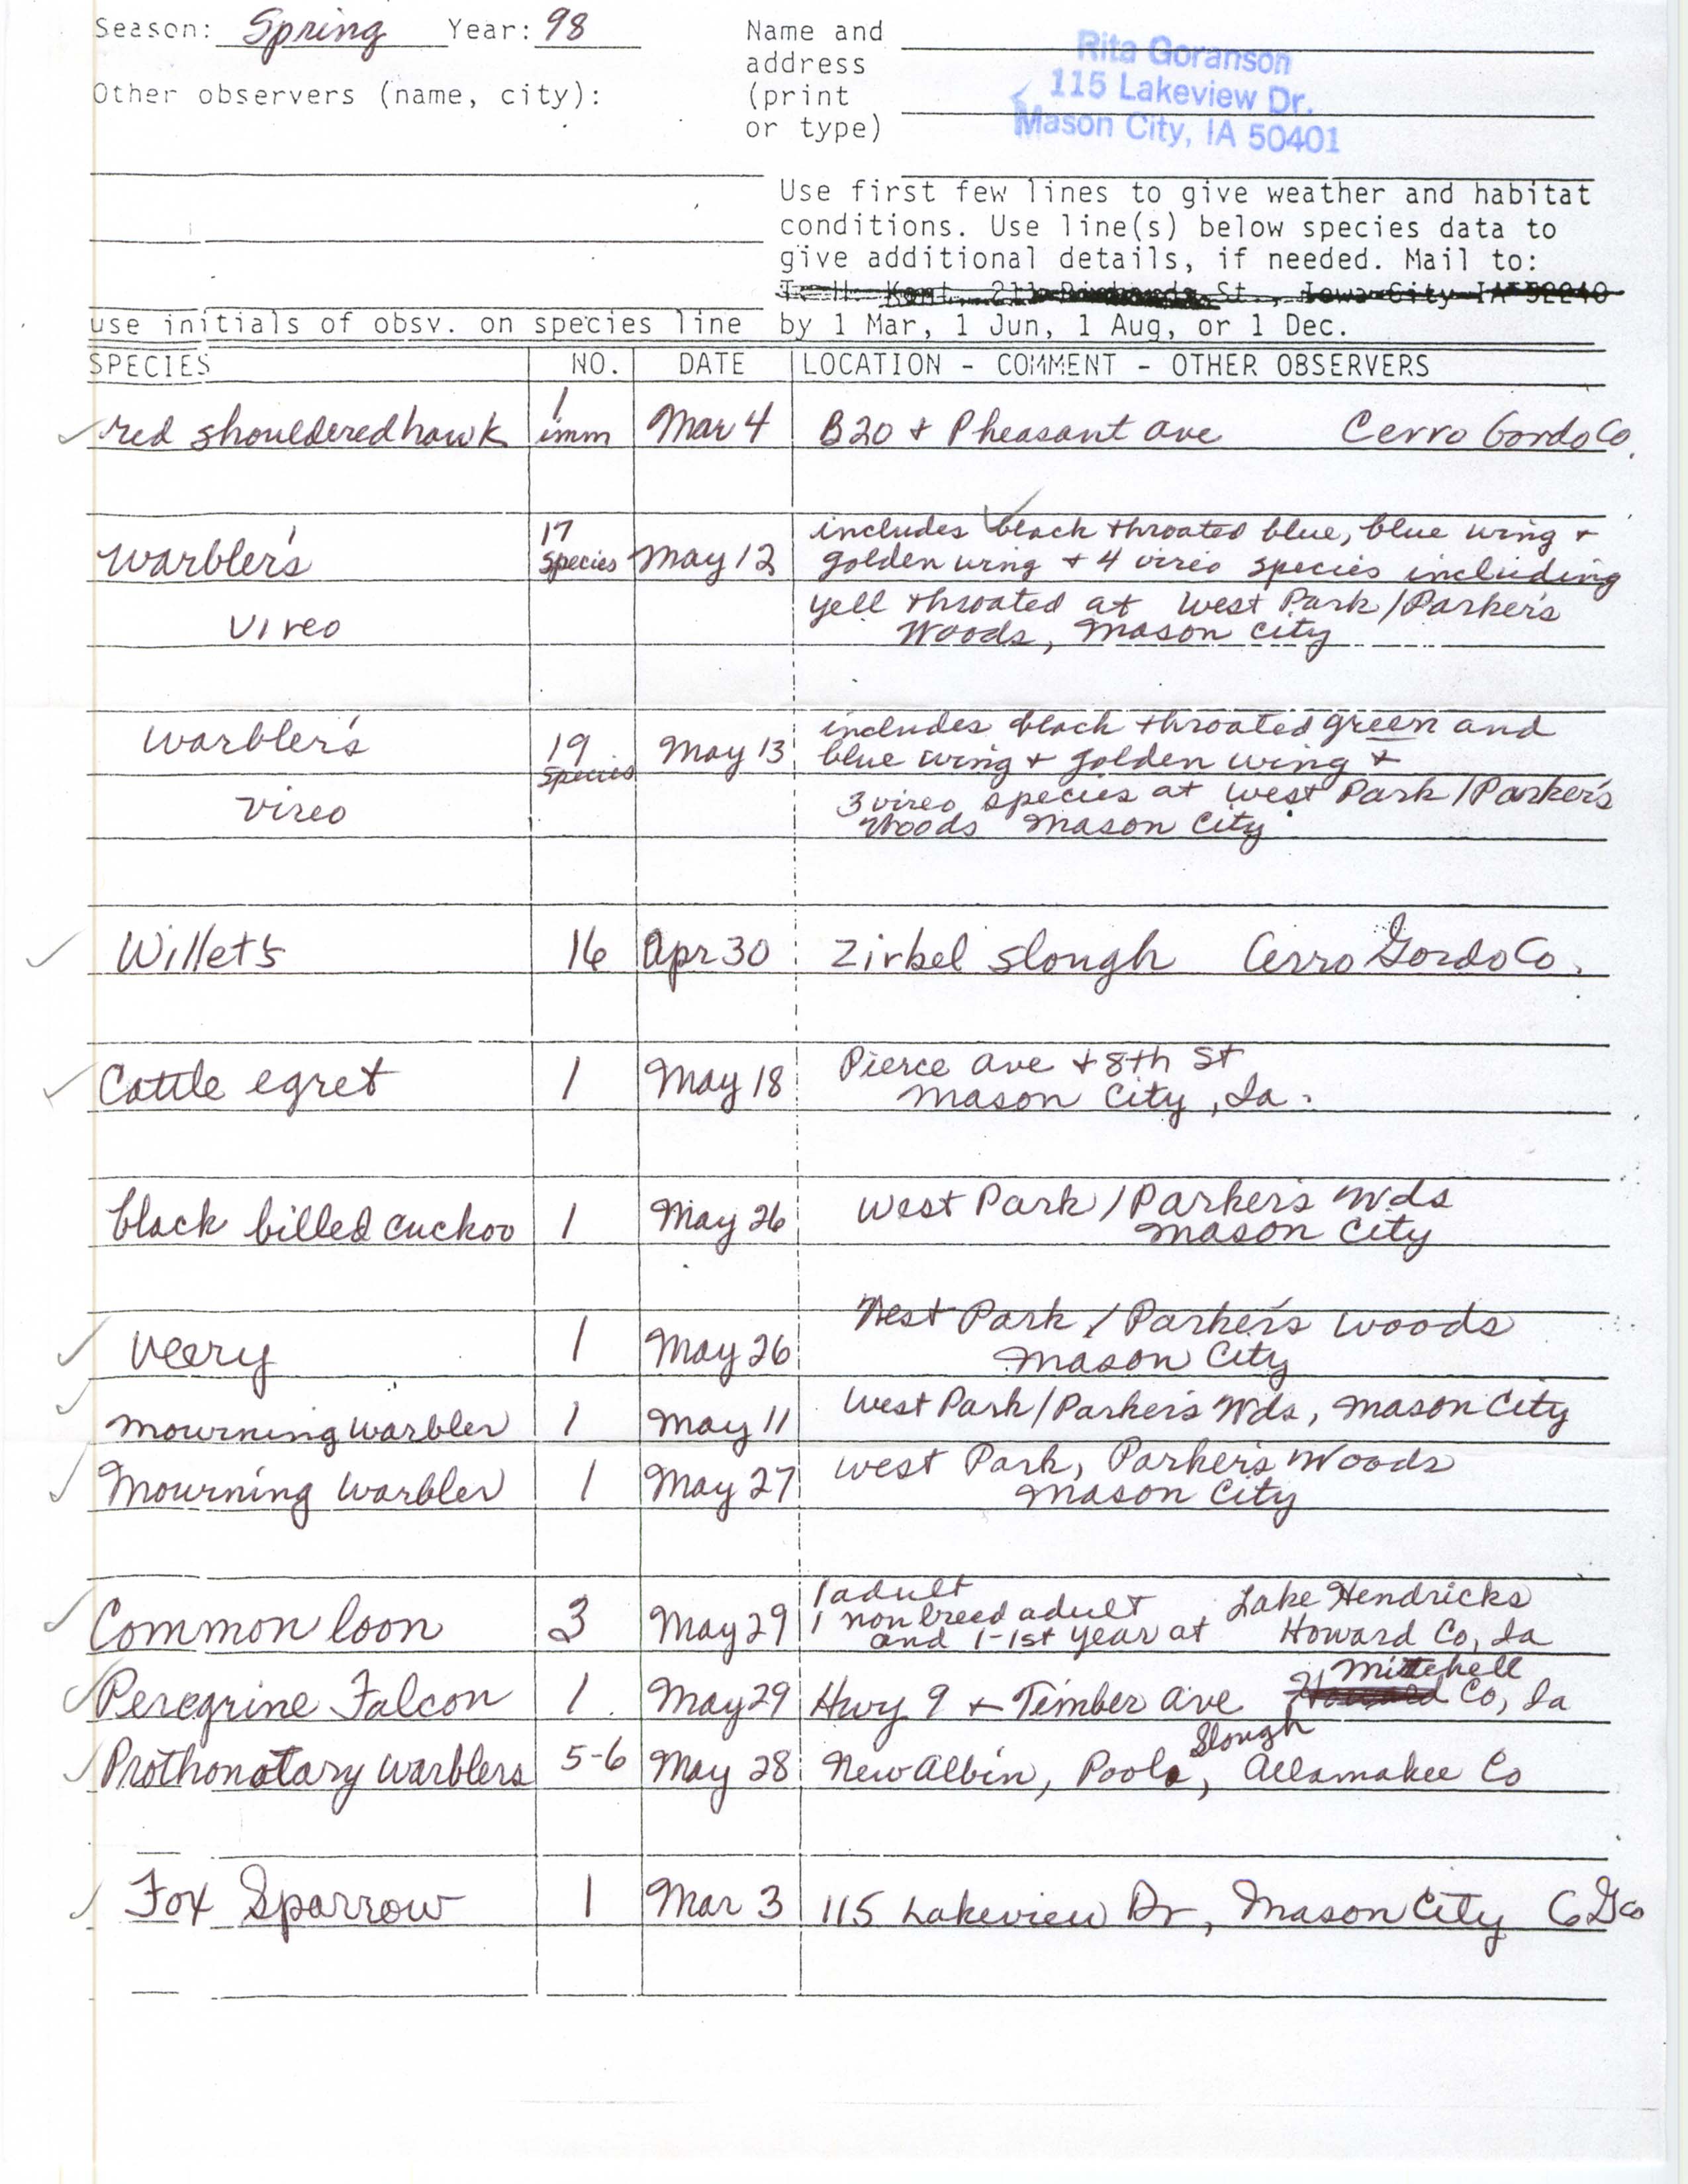 Field reports form for submitting seasonal observations of Iowa birds, Rita Goranson, spring 1998